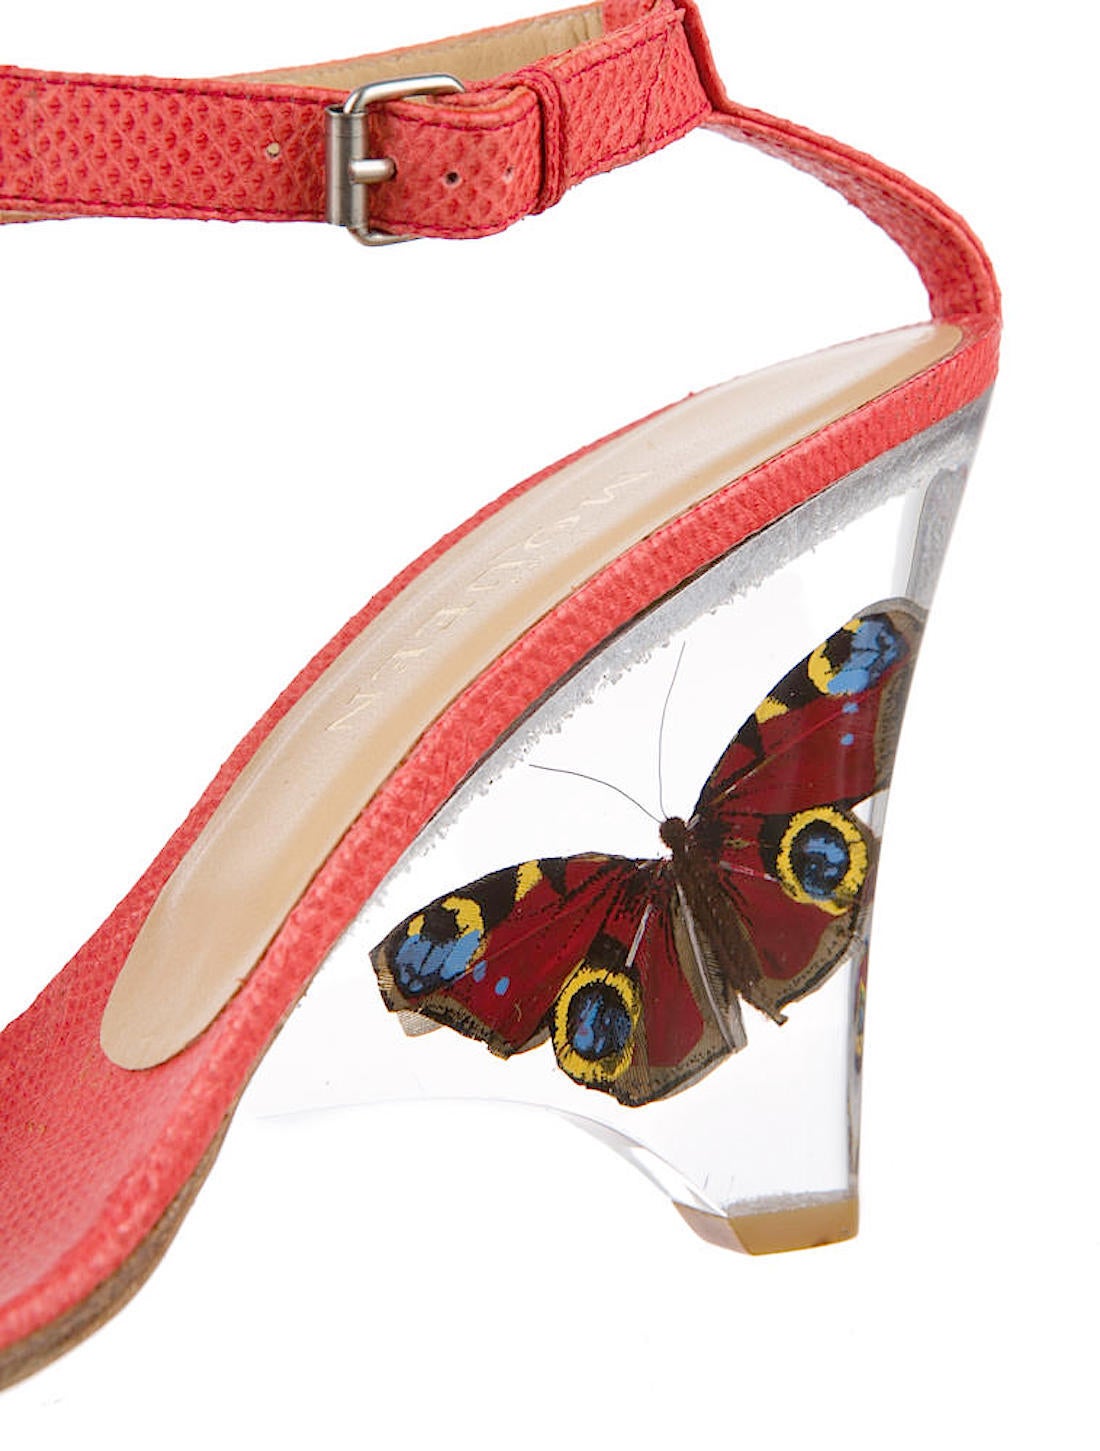 Highly collectible Alexander McQueen sandals from his SS Irere Collection featuring coral embossed leather t-straps and 4